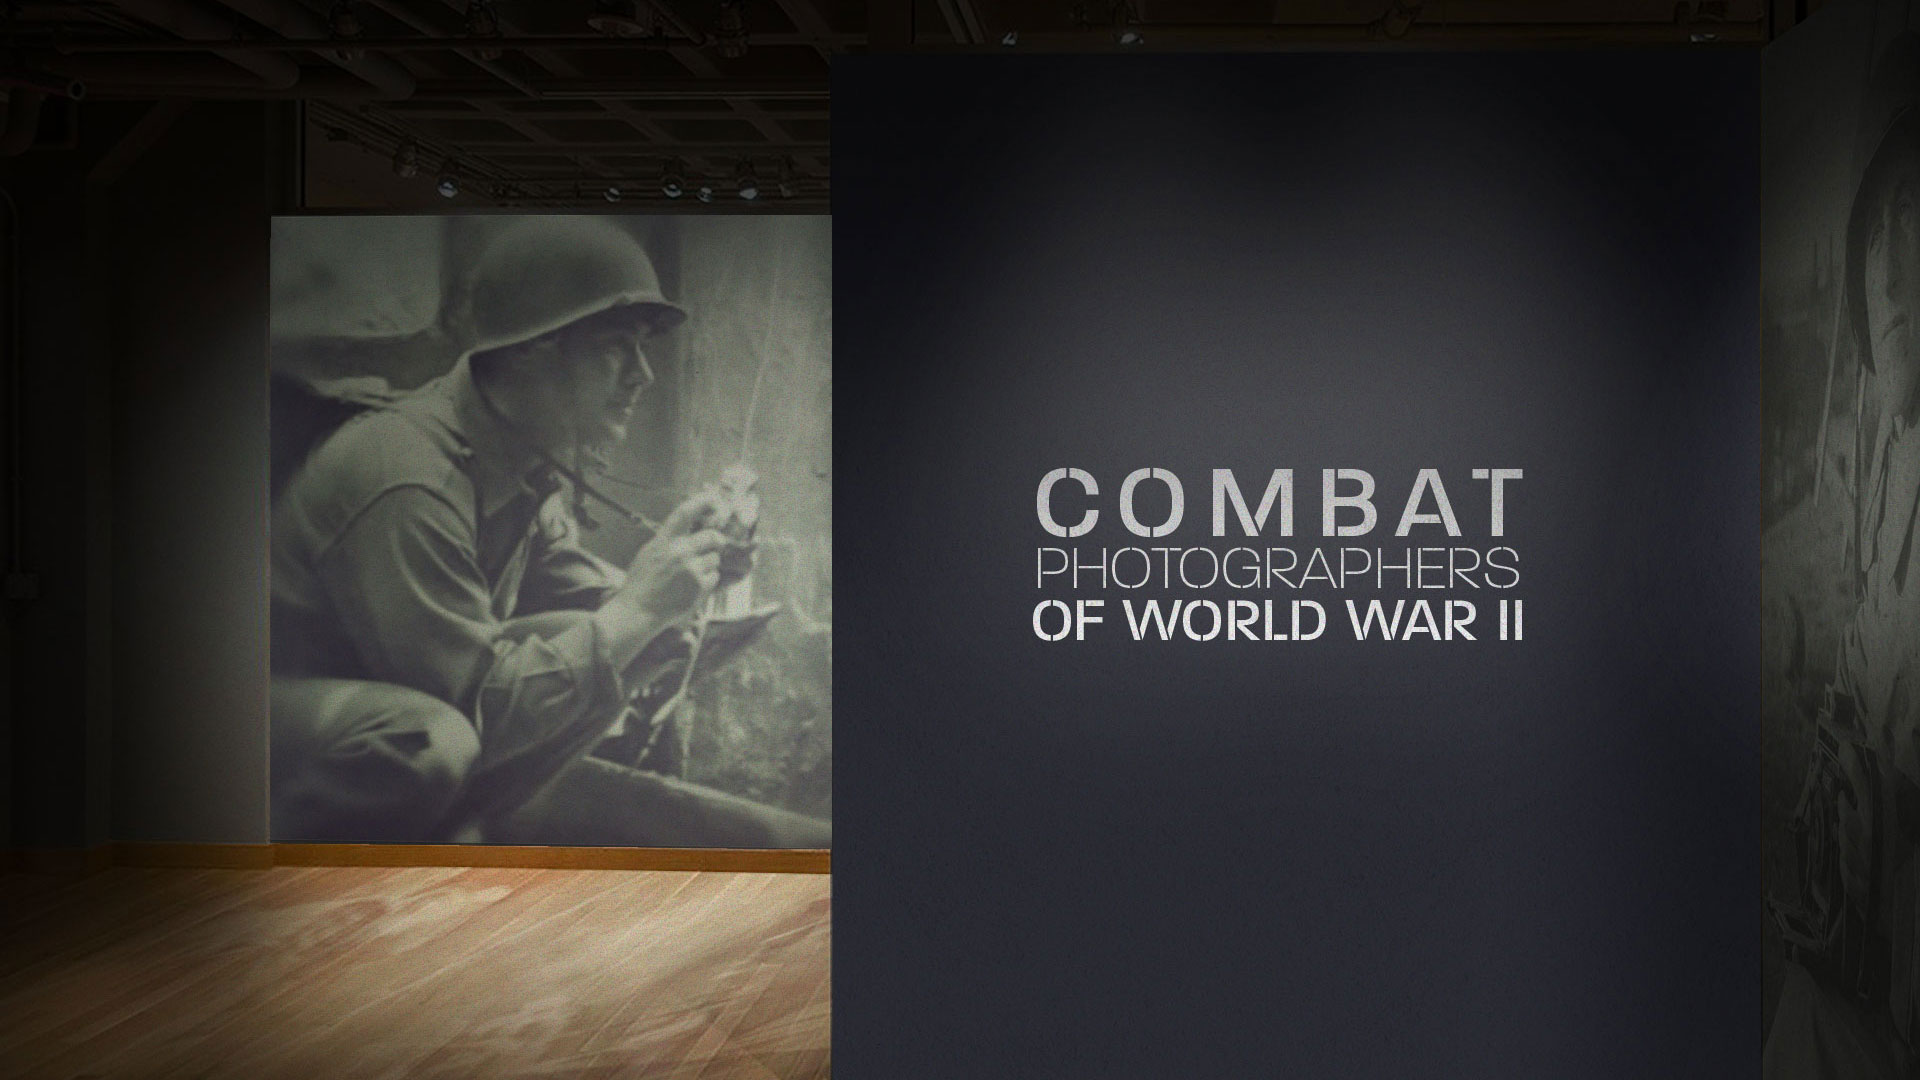 Mockup of the entrance to the Combat Photographers of WWII exhibit with our video playing on the wall